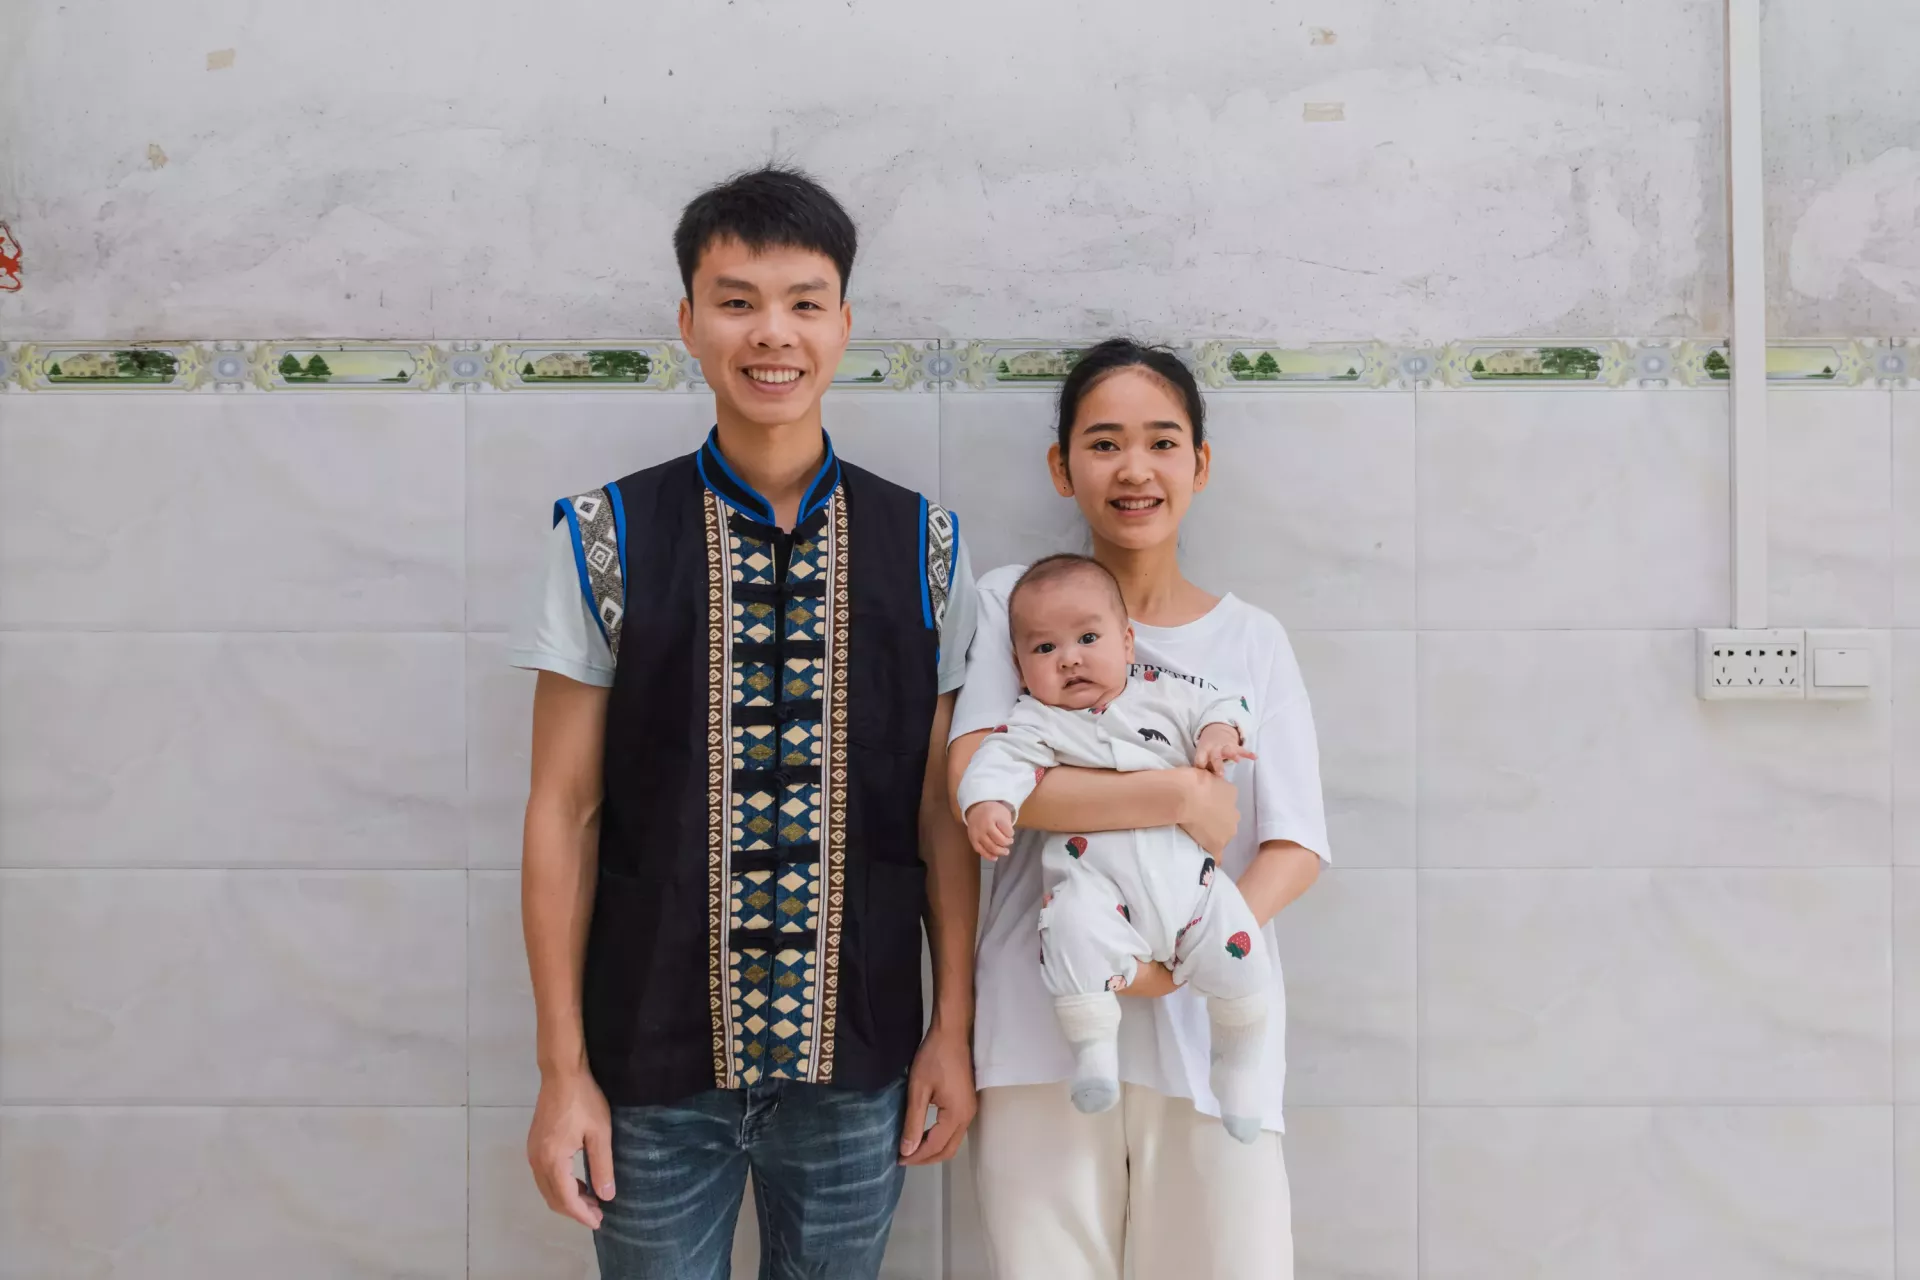 Parents and their 6-month-old child pose for photo in Pingguo, Guangxi province, China, on 18 April 2023.